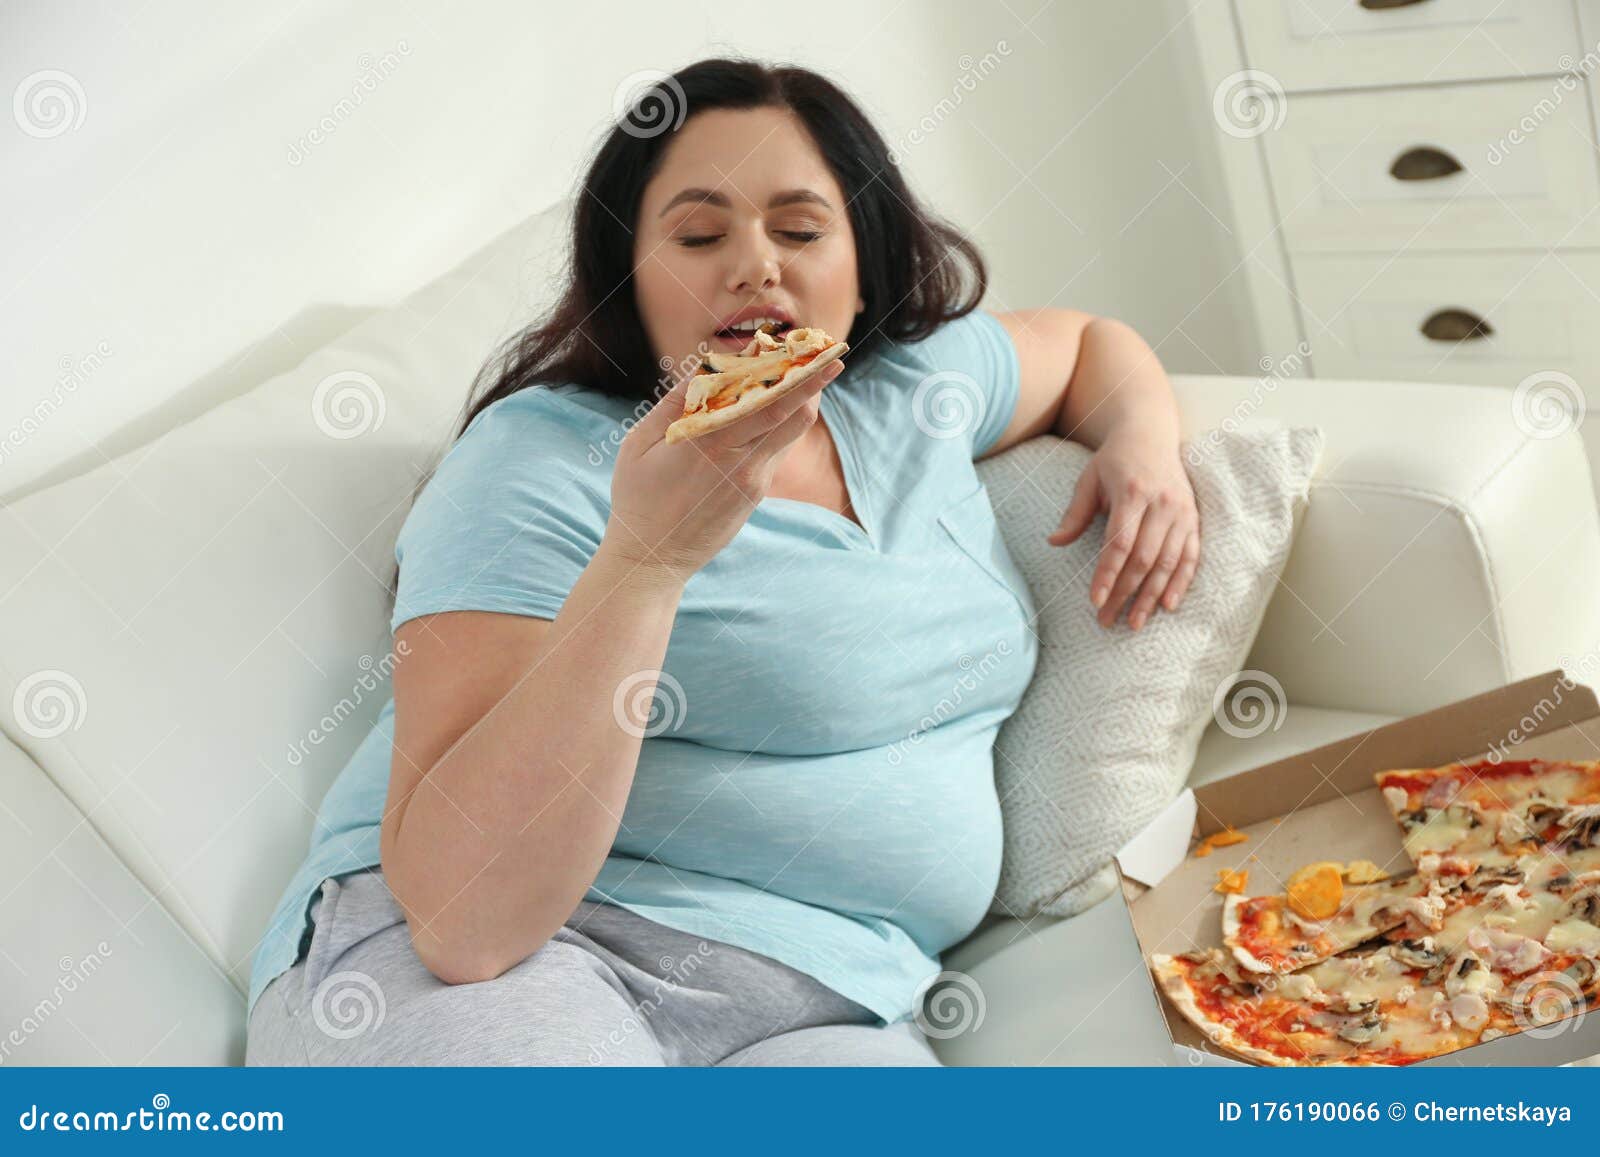 fat lady eating pizza